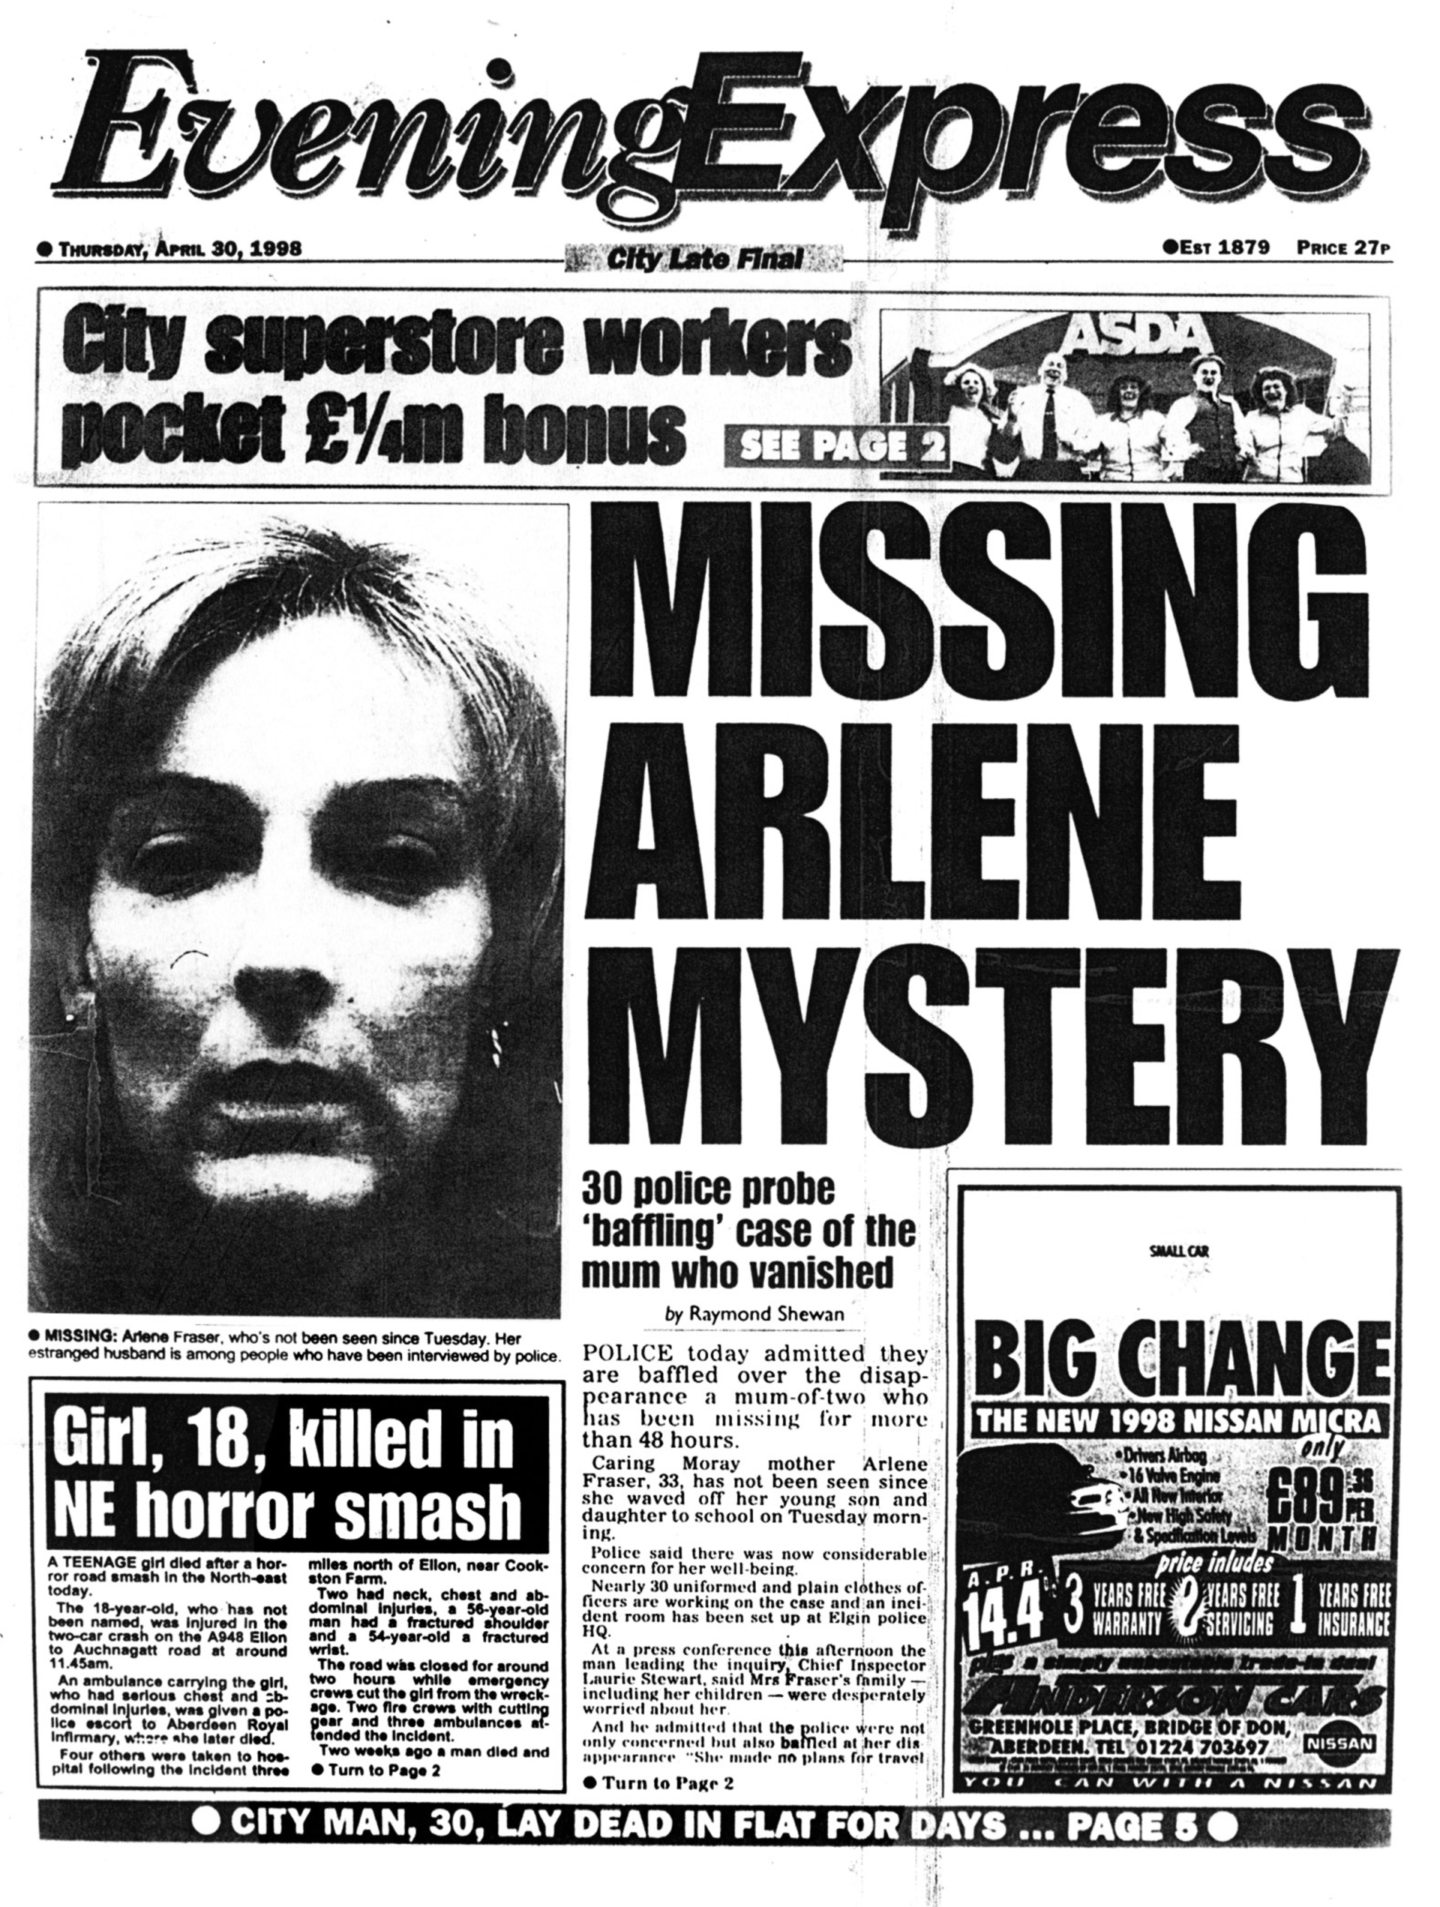 Evening Express front page featuring Arlene Fraser's disappearance on April 30,1998